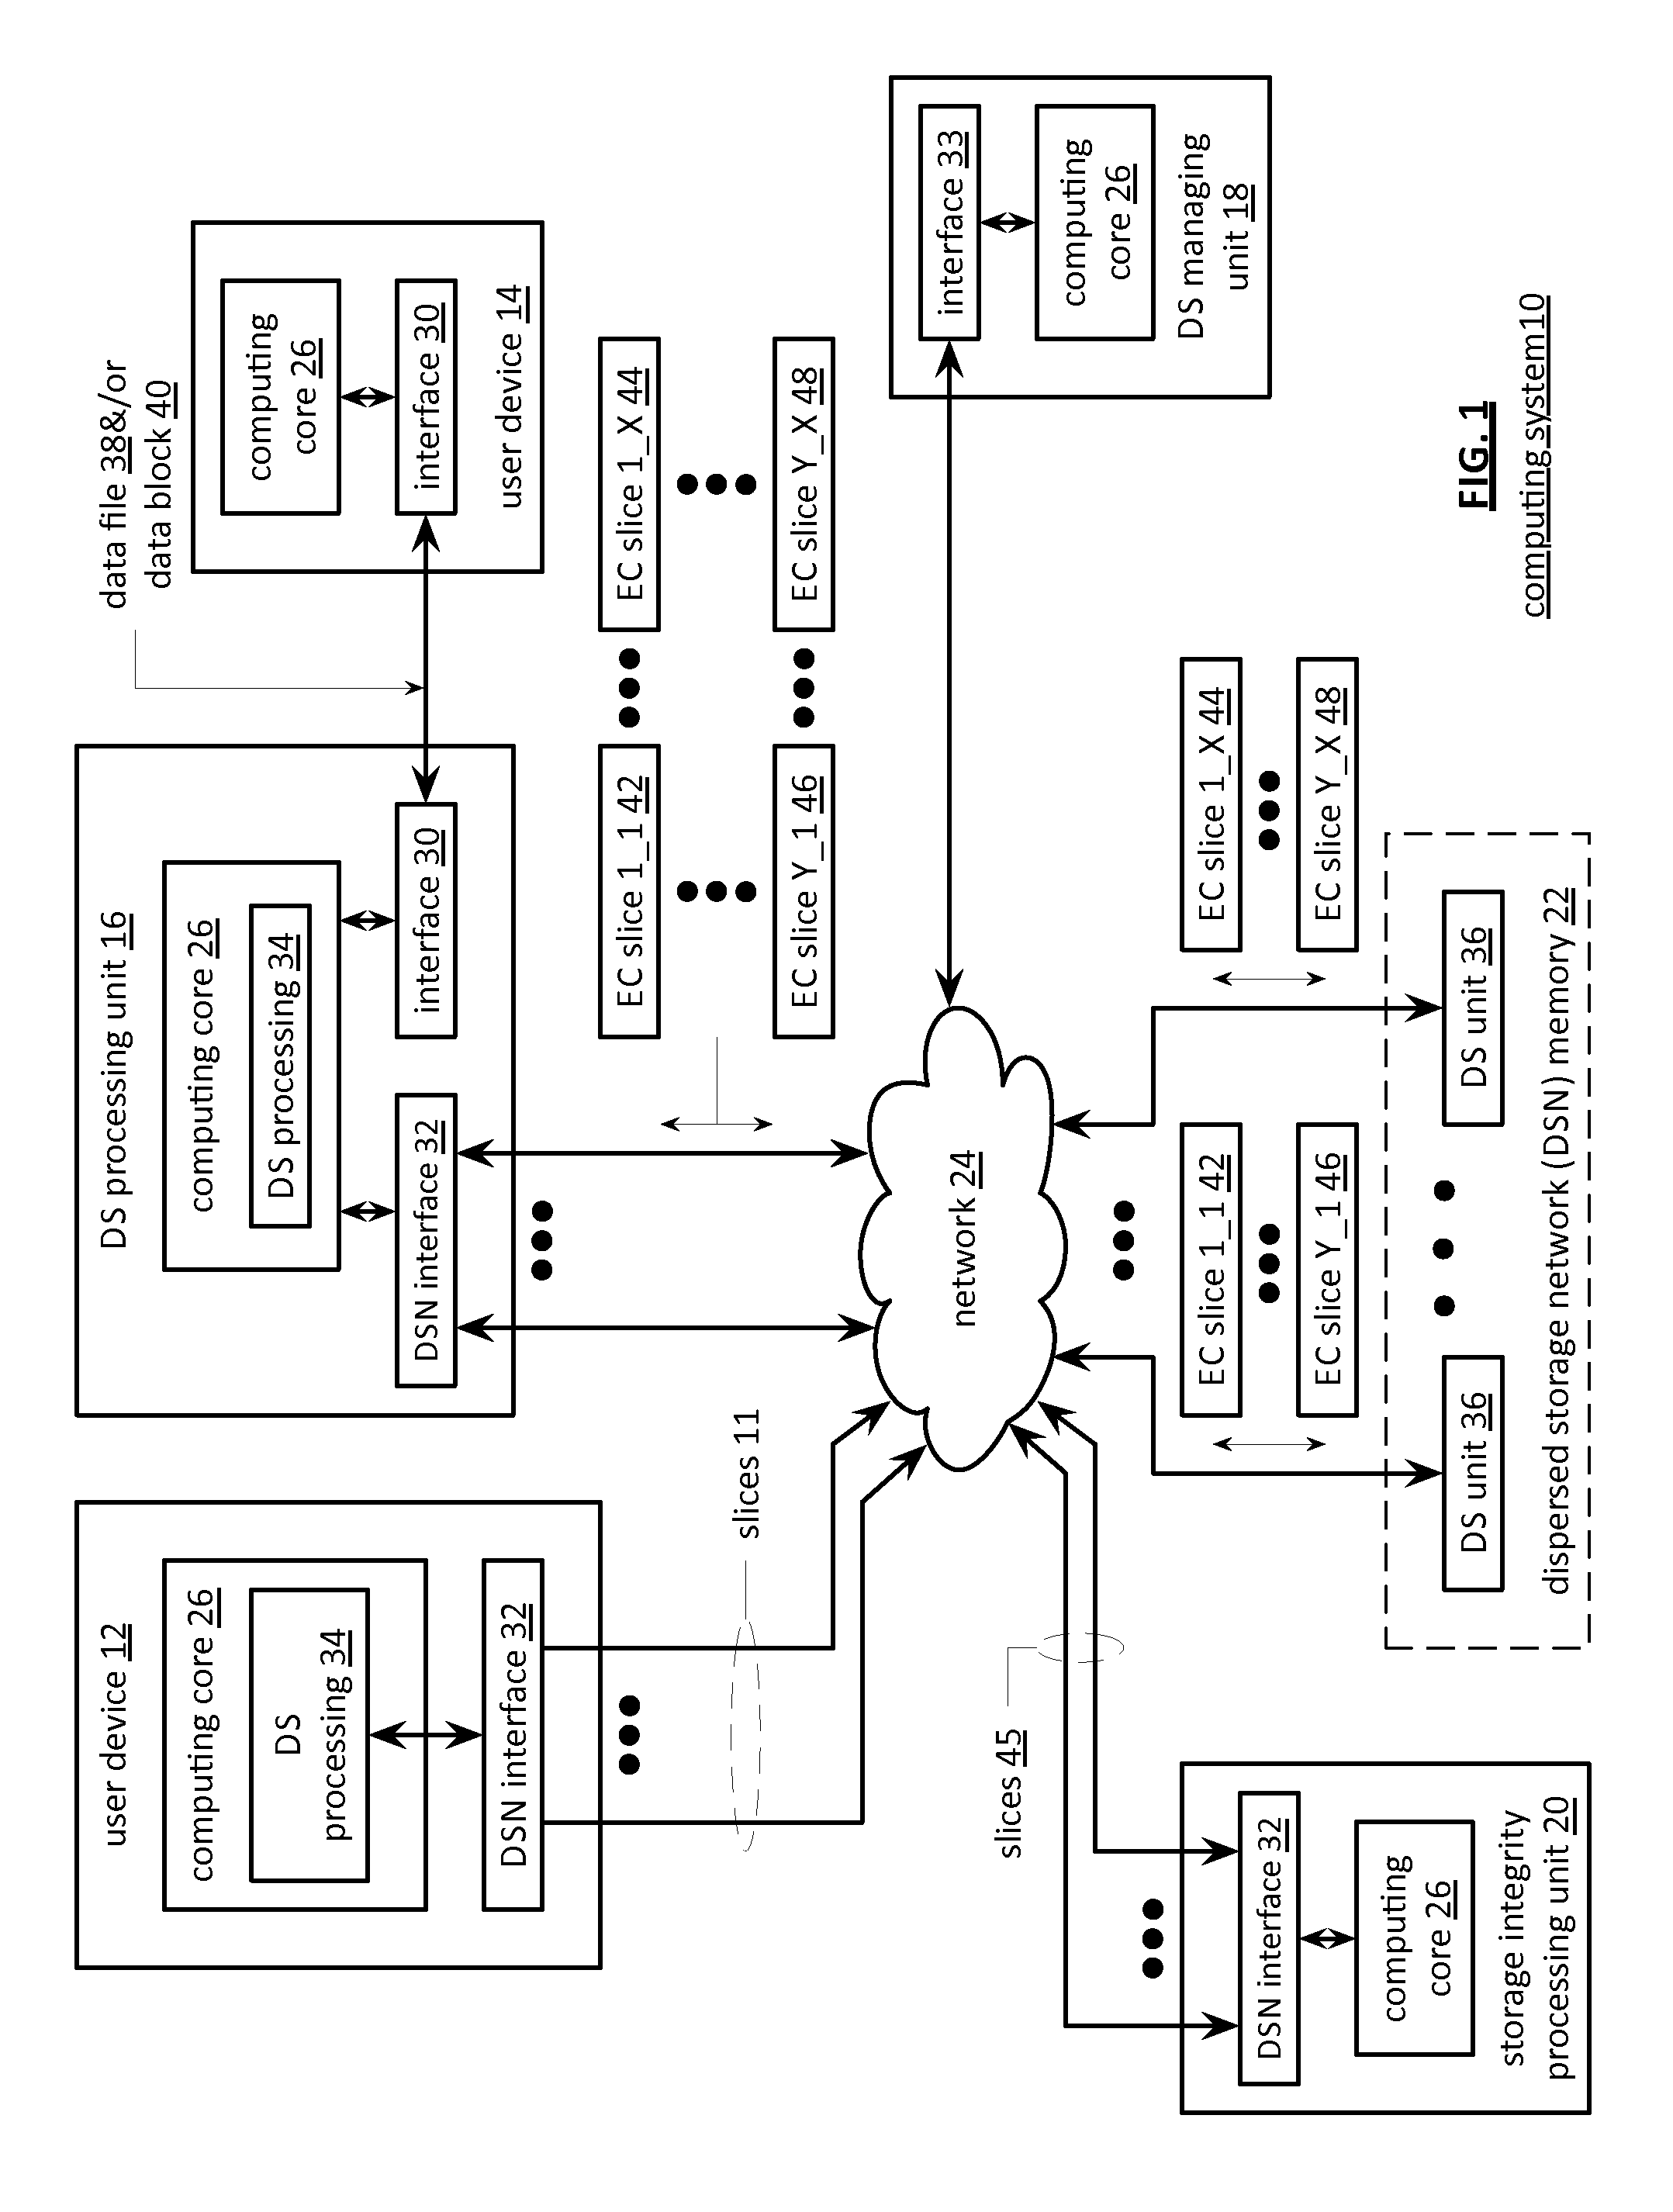 Secure rebuilding of an encoded data slice in a dispersed storage network